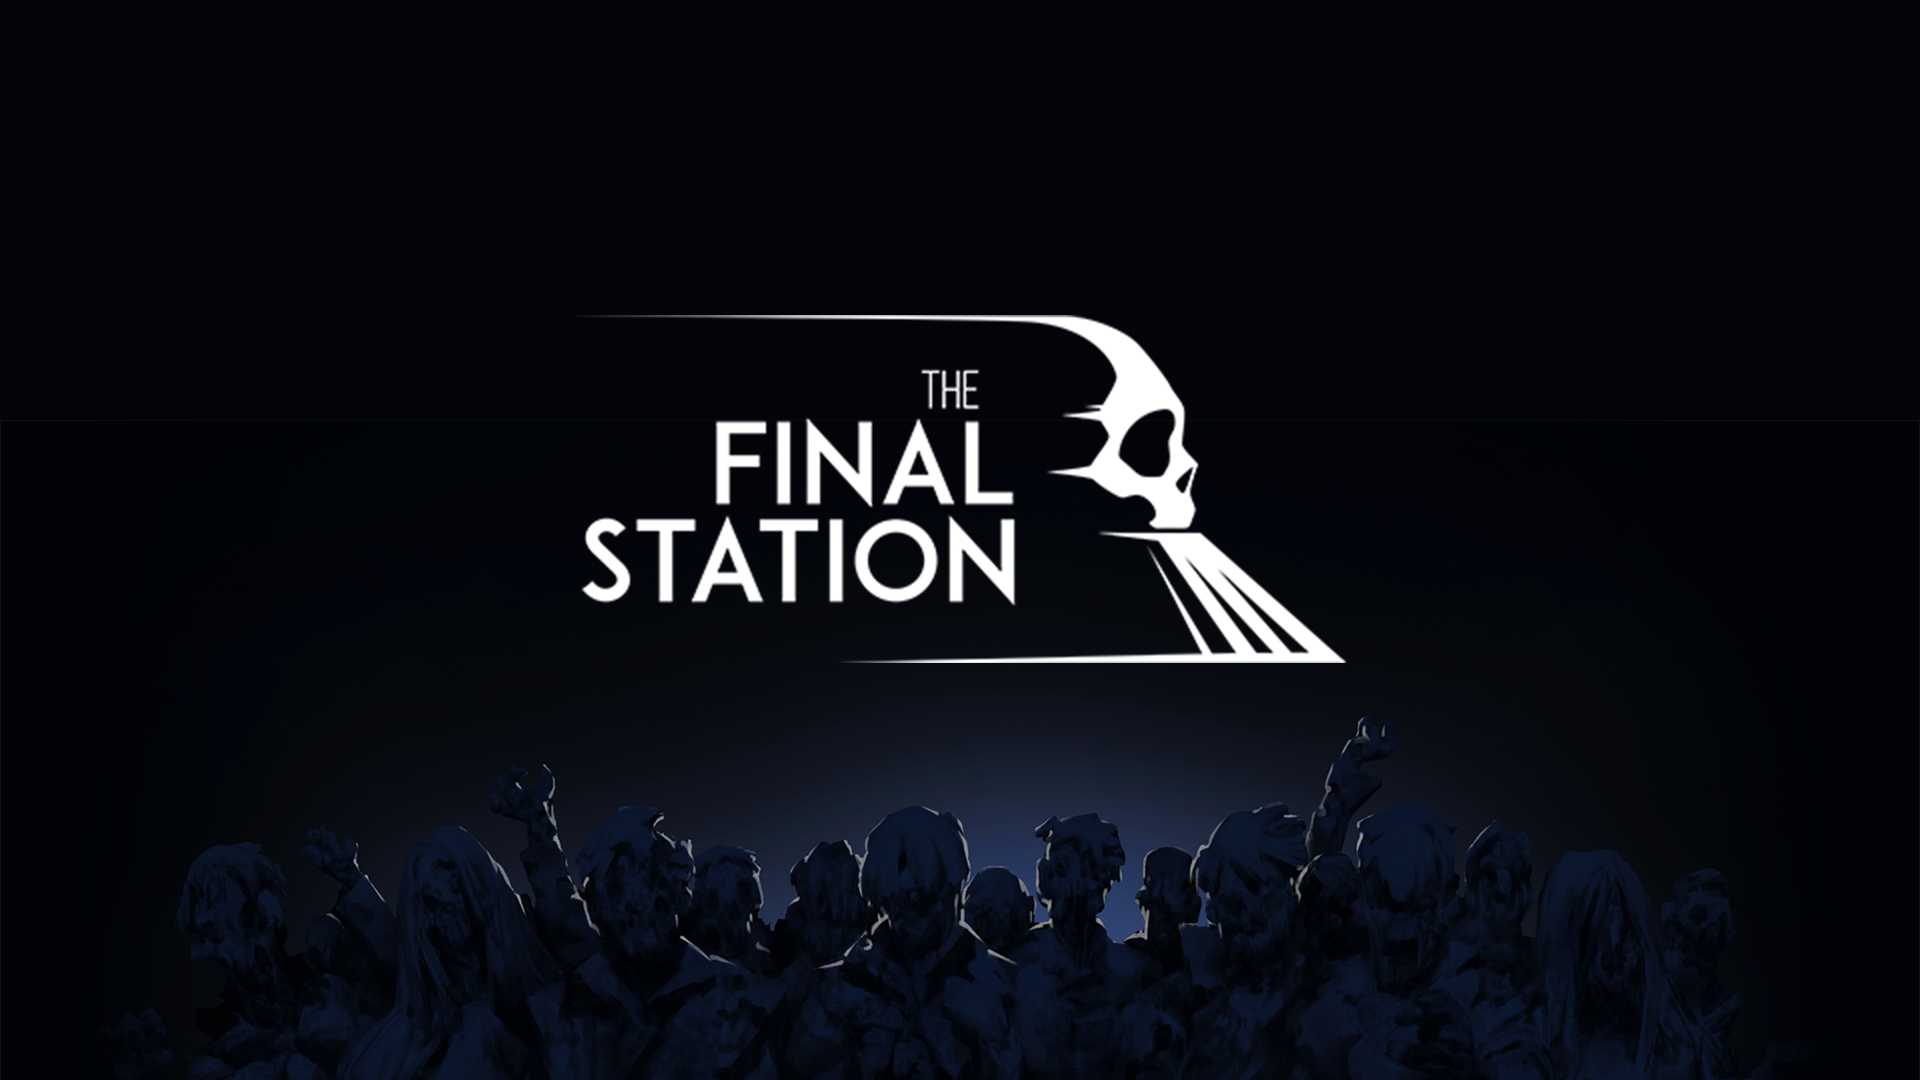 The finals музыка. The Final Station. The Final Station арт. The finslstation. Final Station игра.